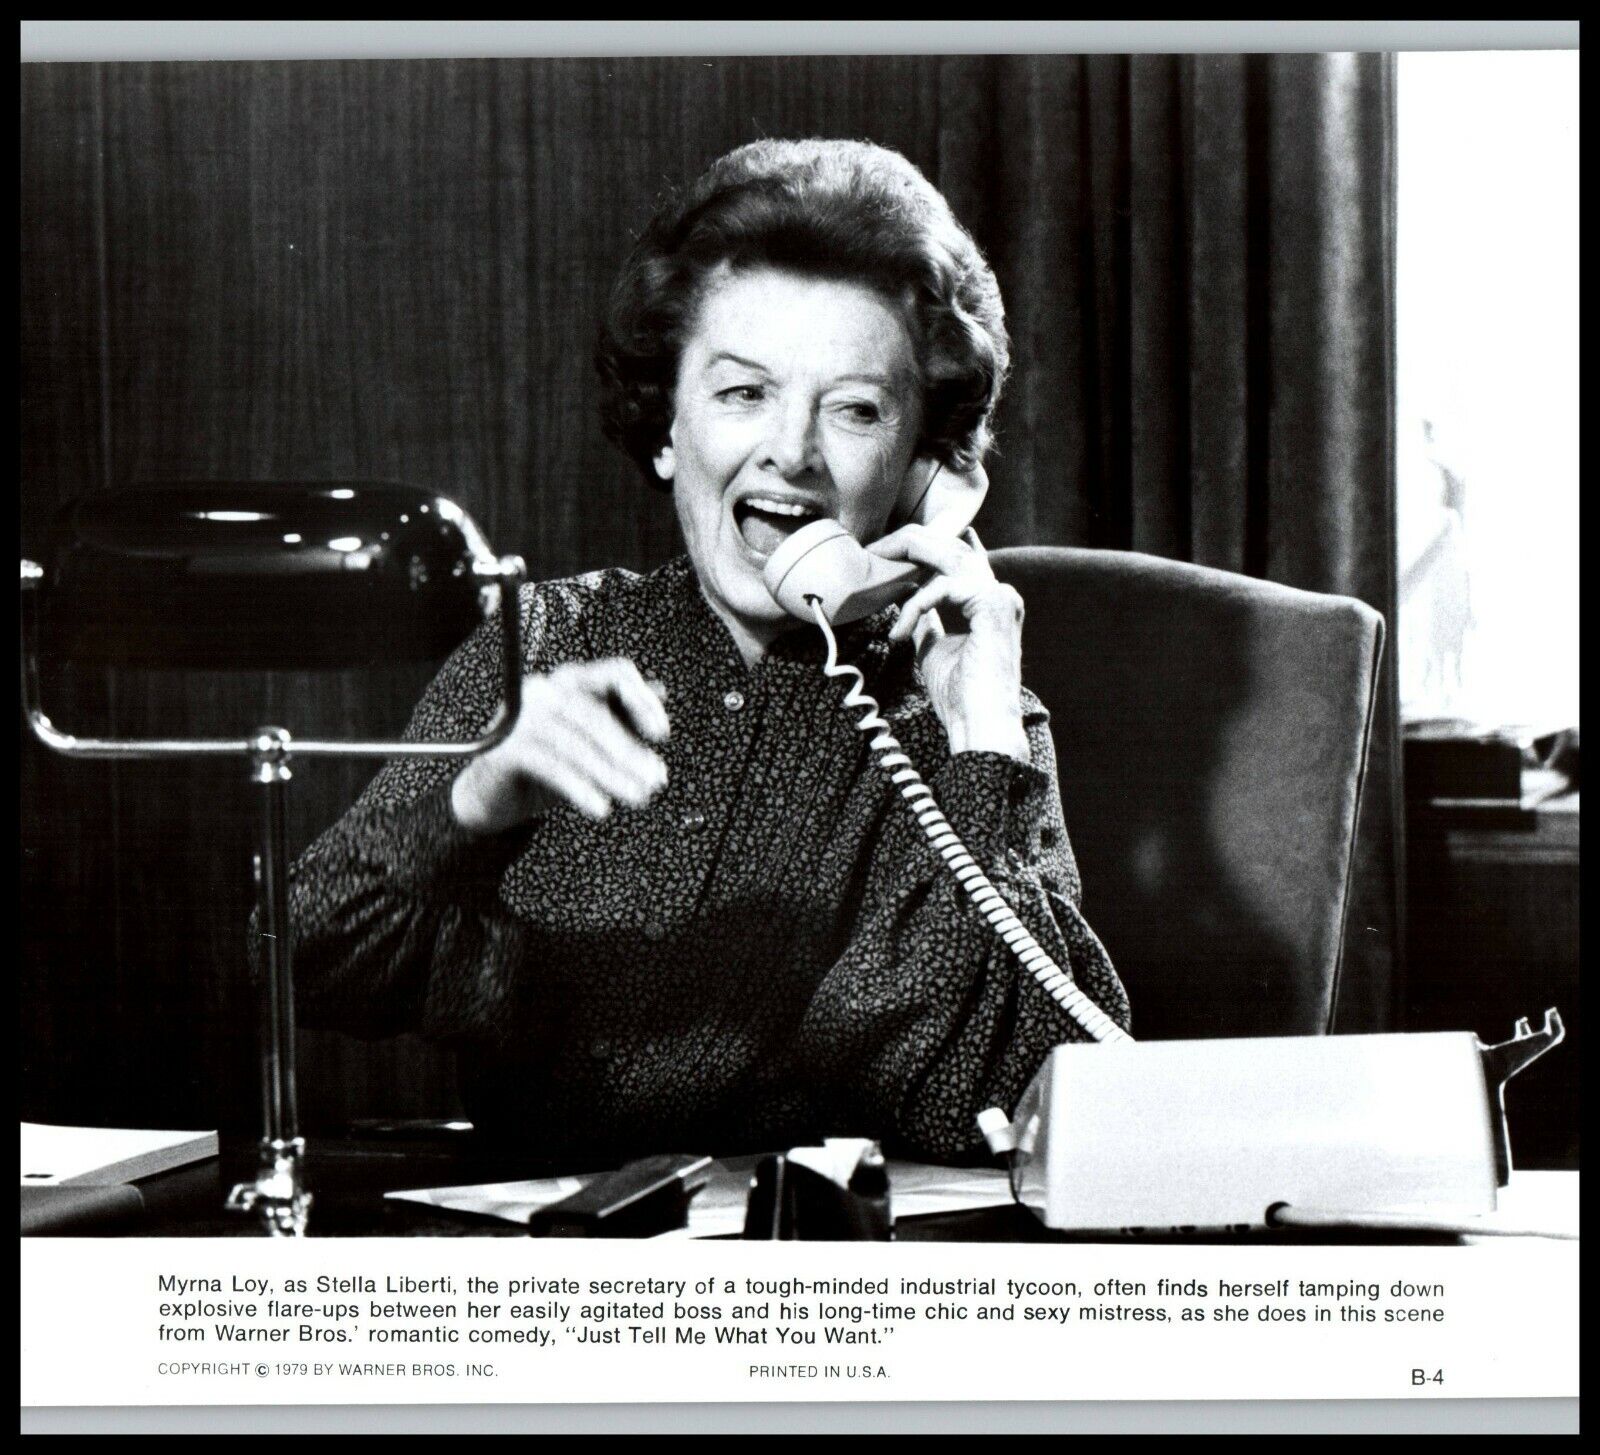 Myrna Loy in Just Tell Me What You Want (1979) WARNER BROS ORIGINAL PHOTO MC 2